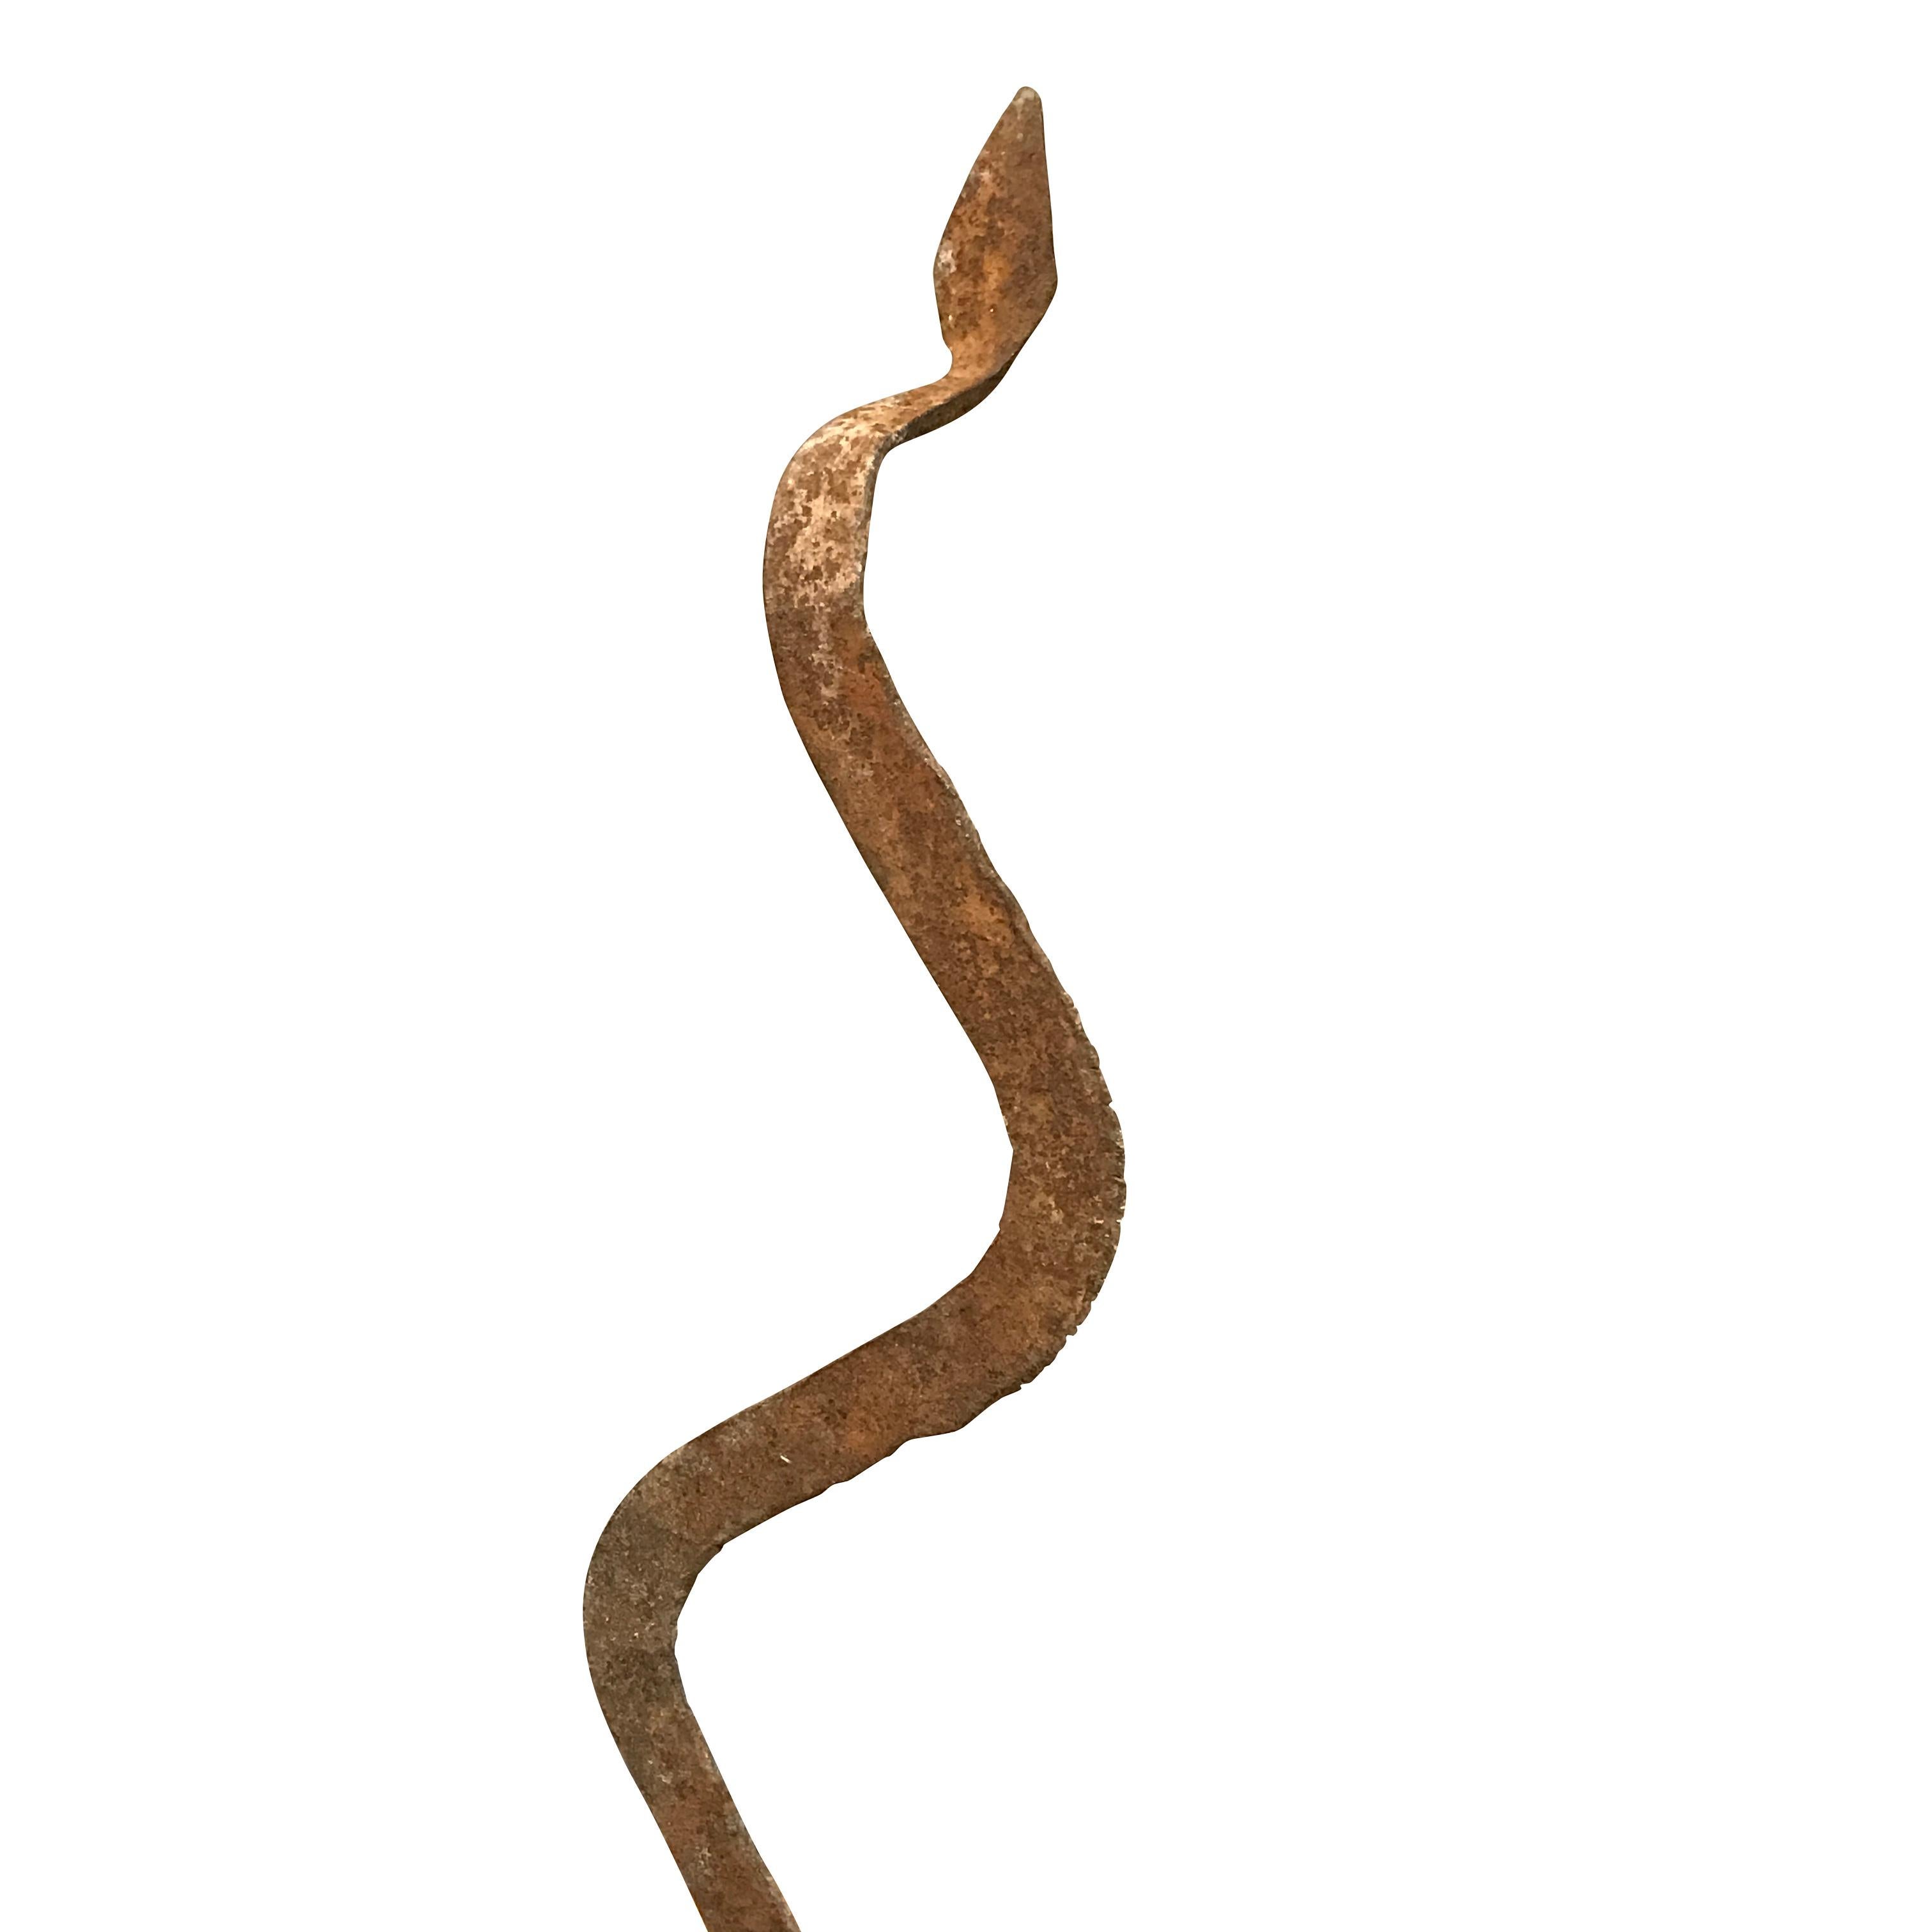 19th century iron snake sculpture on metal stand from the Lobi tribe in Burkina Faso, Africa
Naturally aged patina
Makes a great collection with S4589/91/92
Stand is steel and measures 4.75